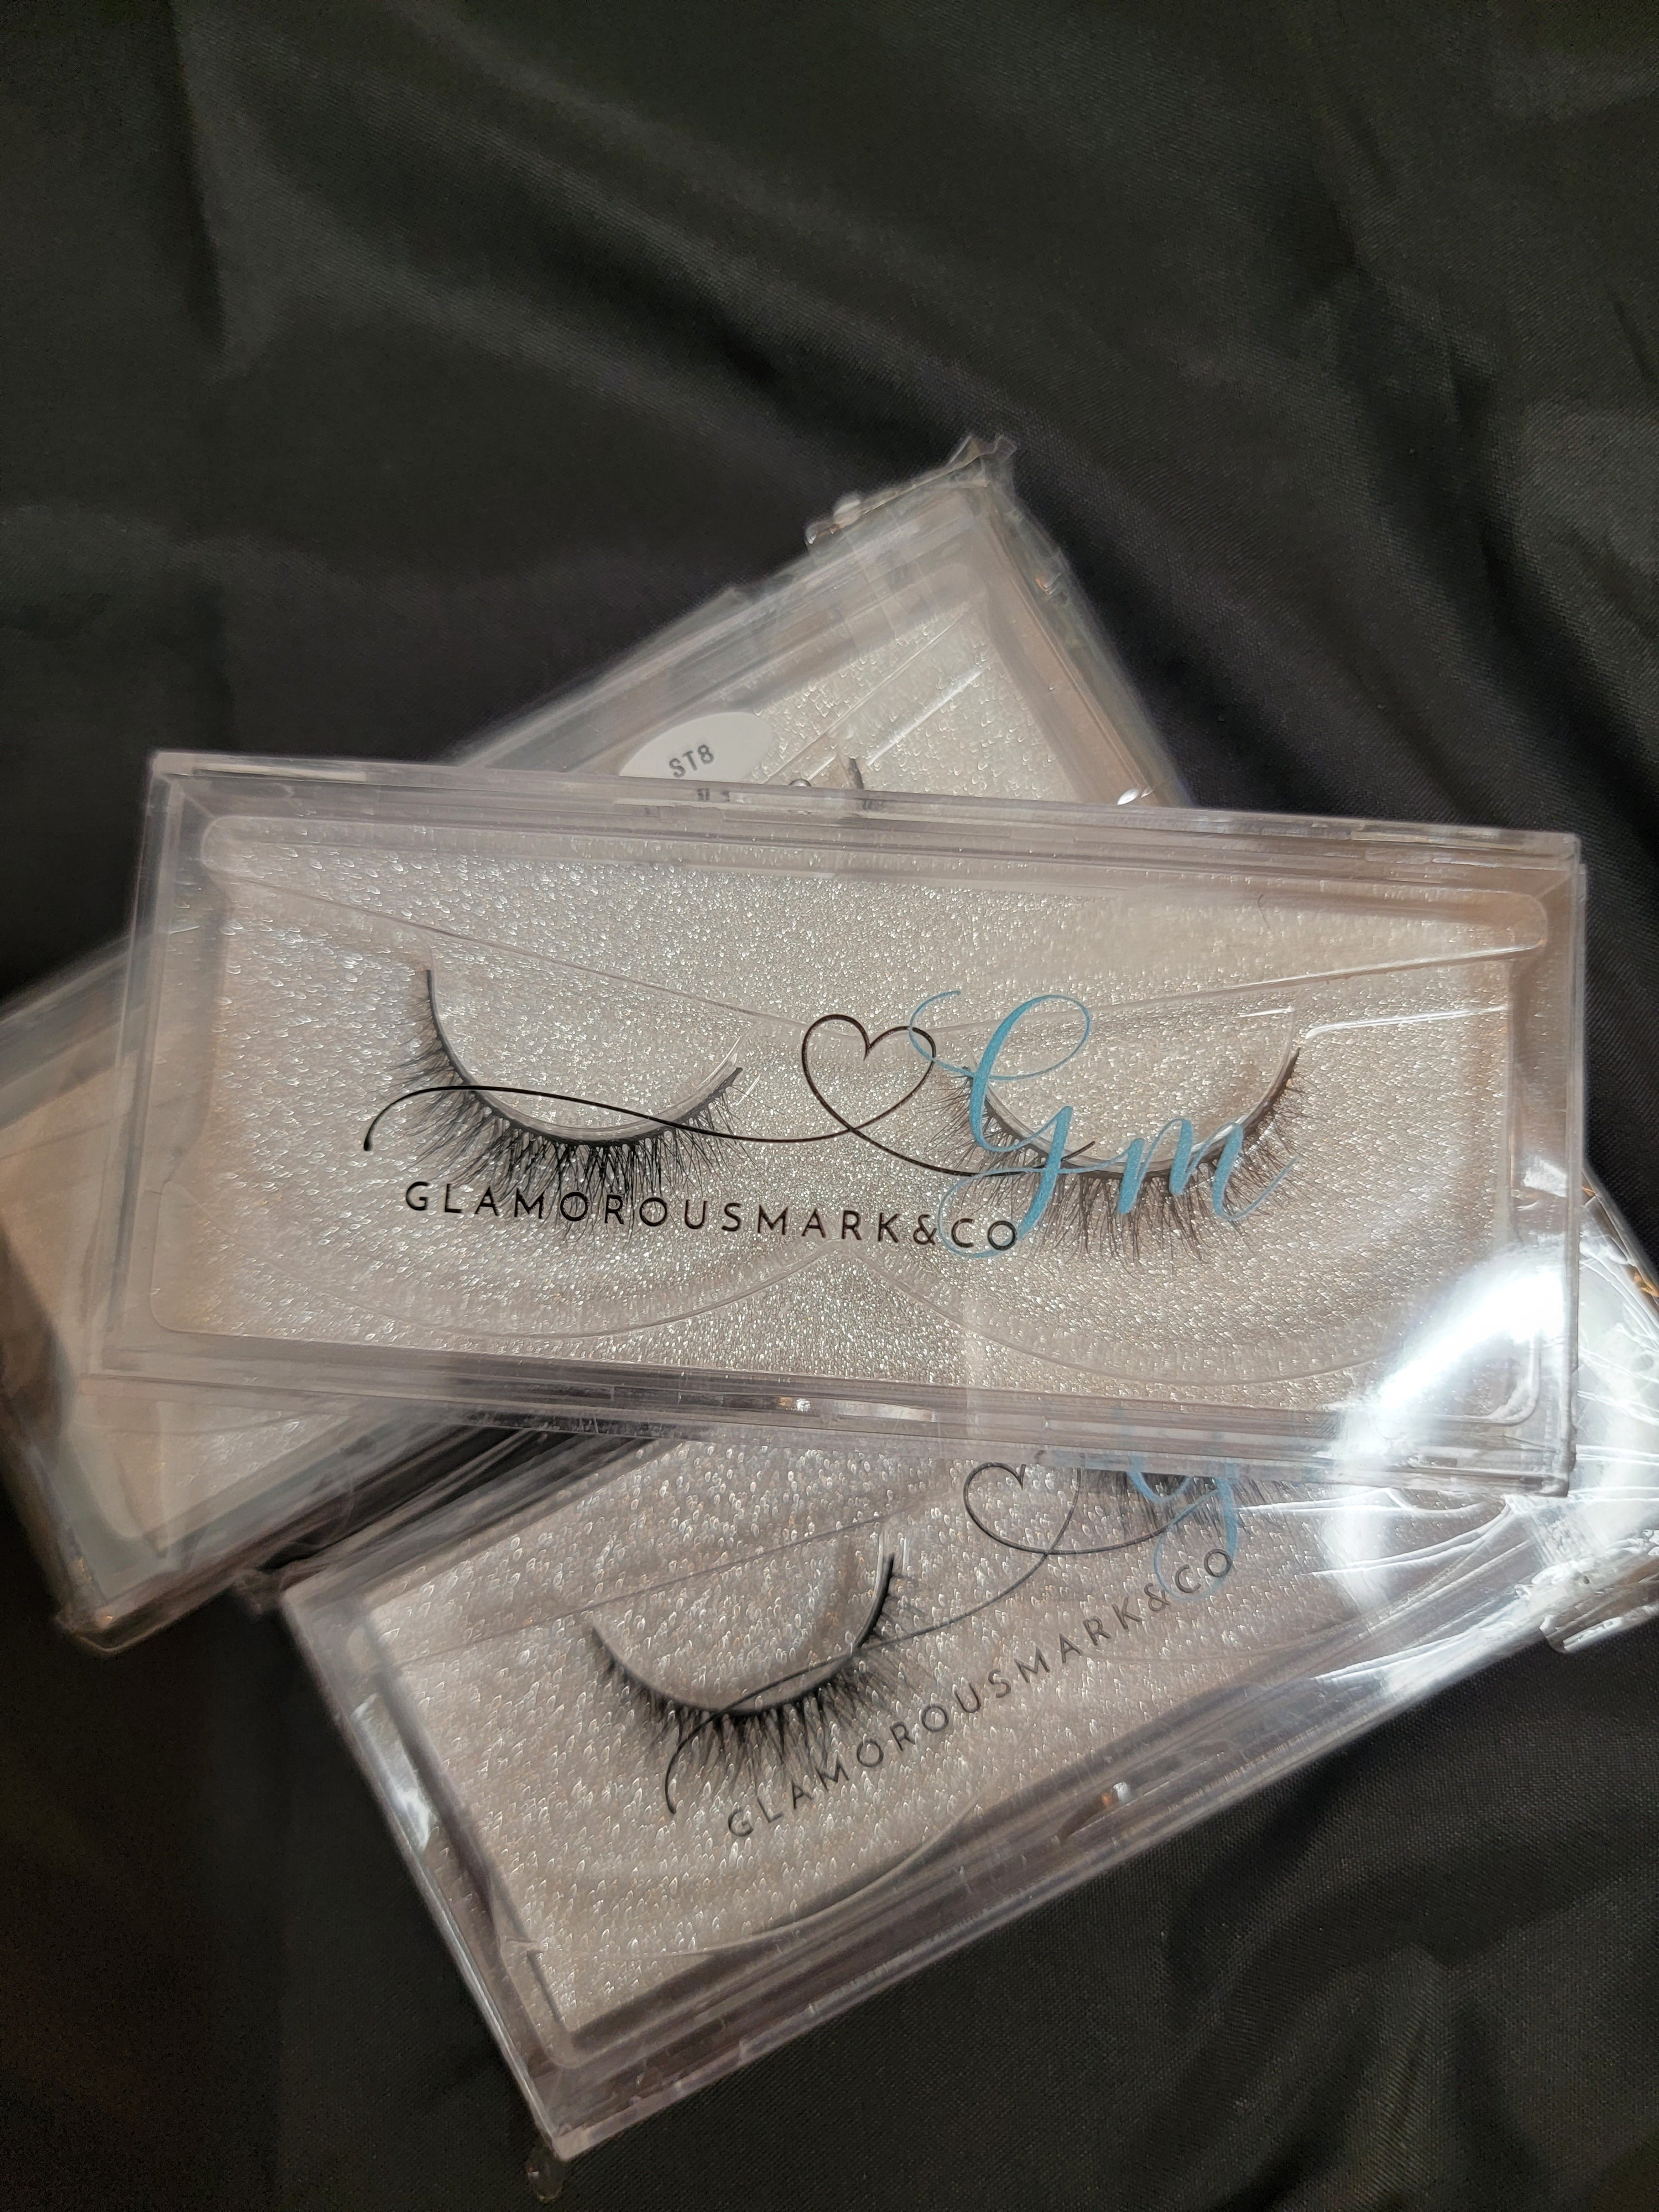 10 mm synthetic lashes